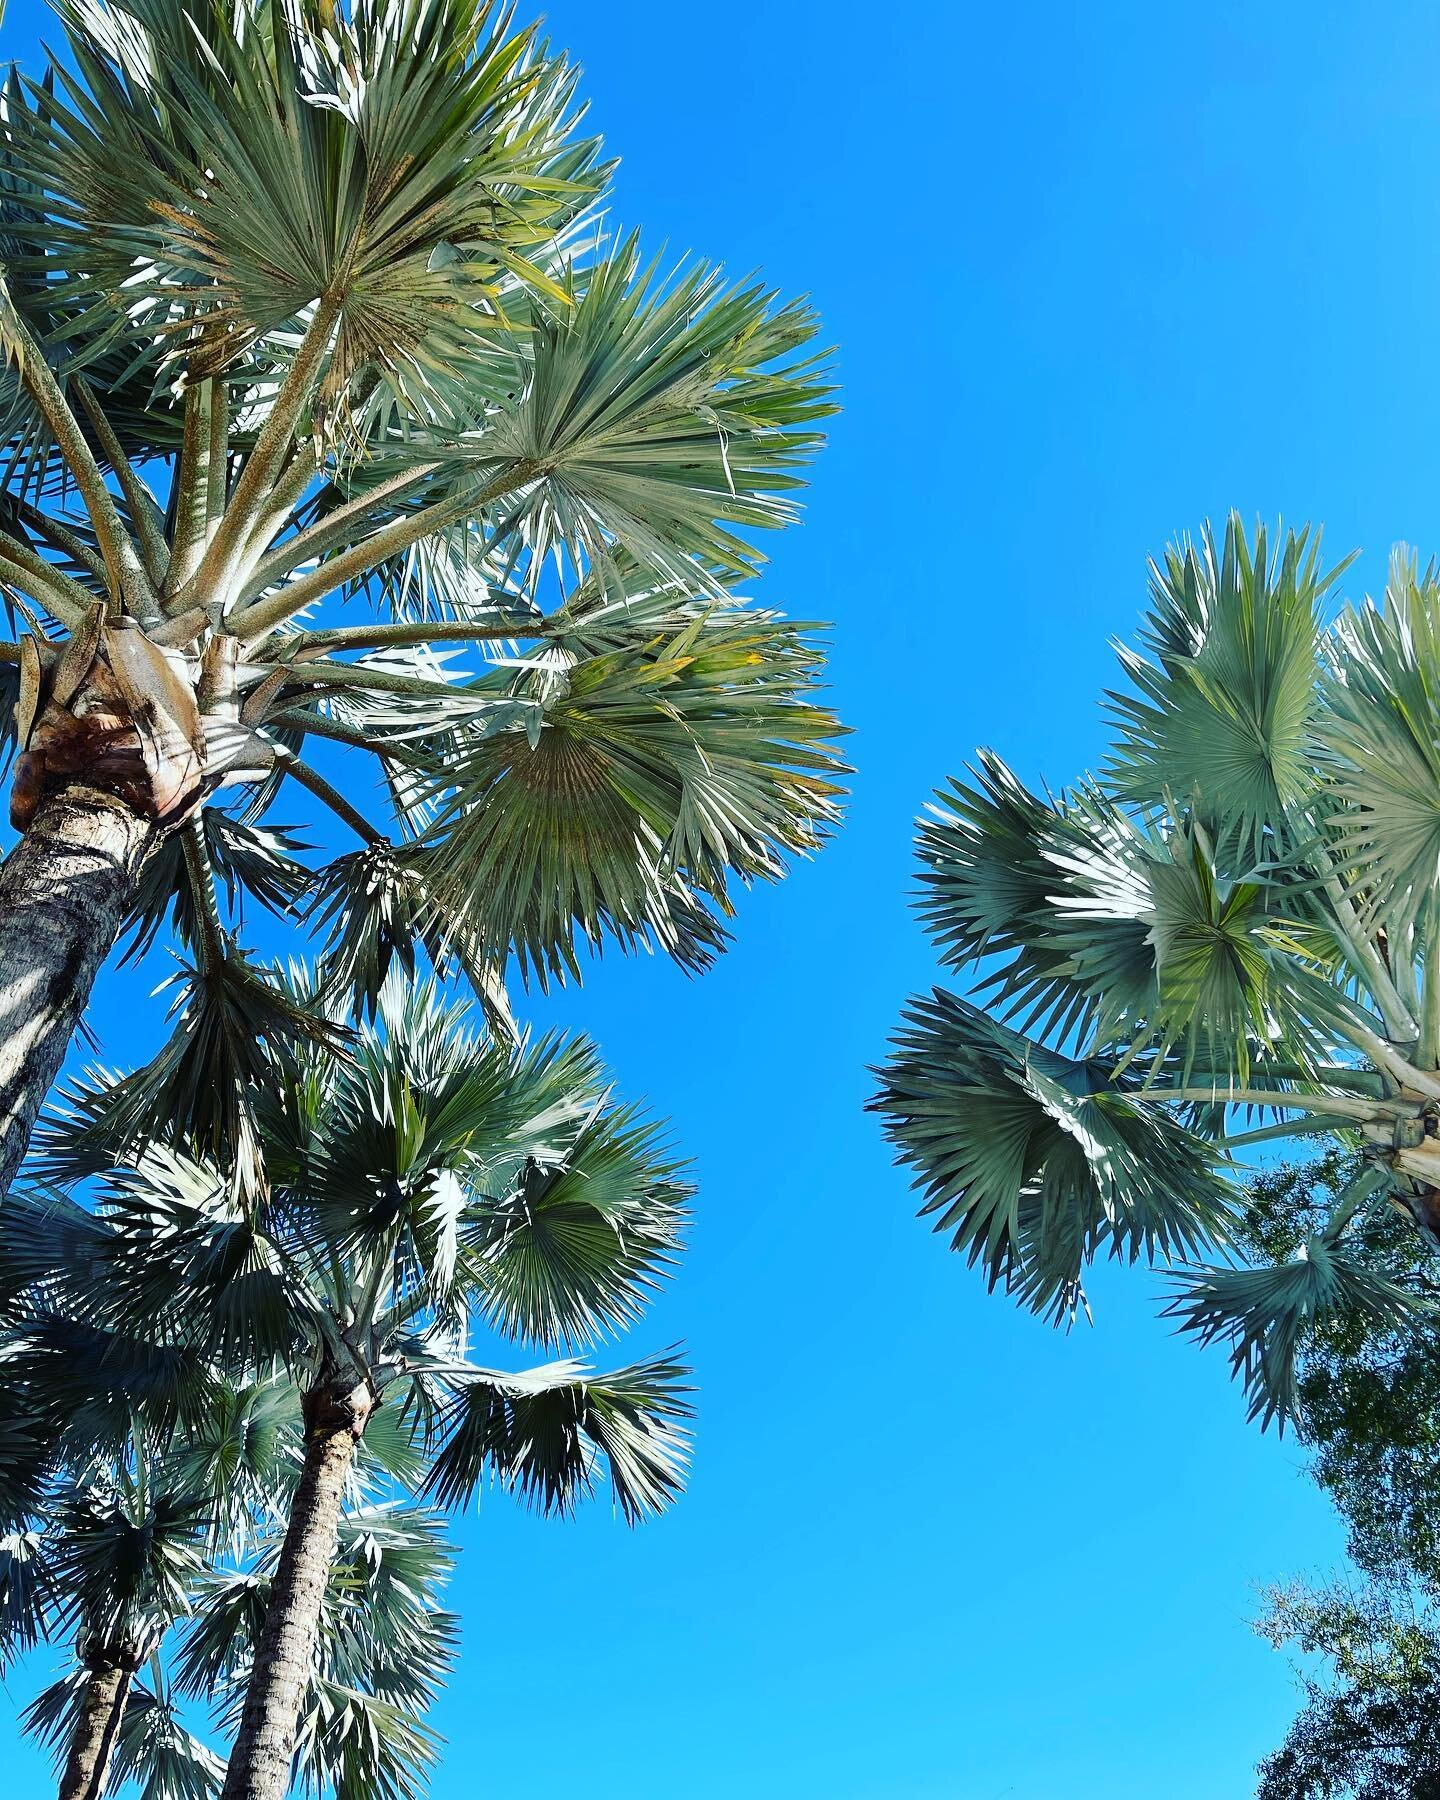 Any day that includes palm trees and blue skies... is a good day.